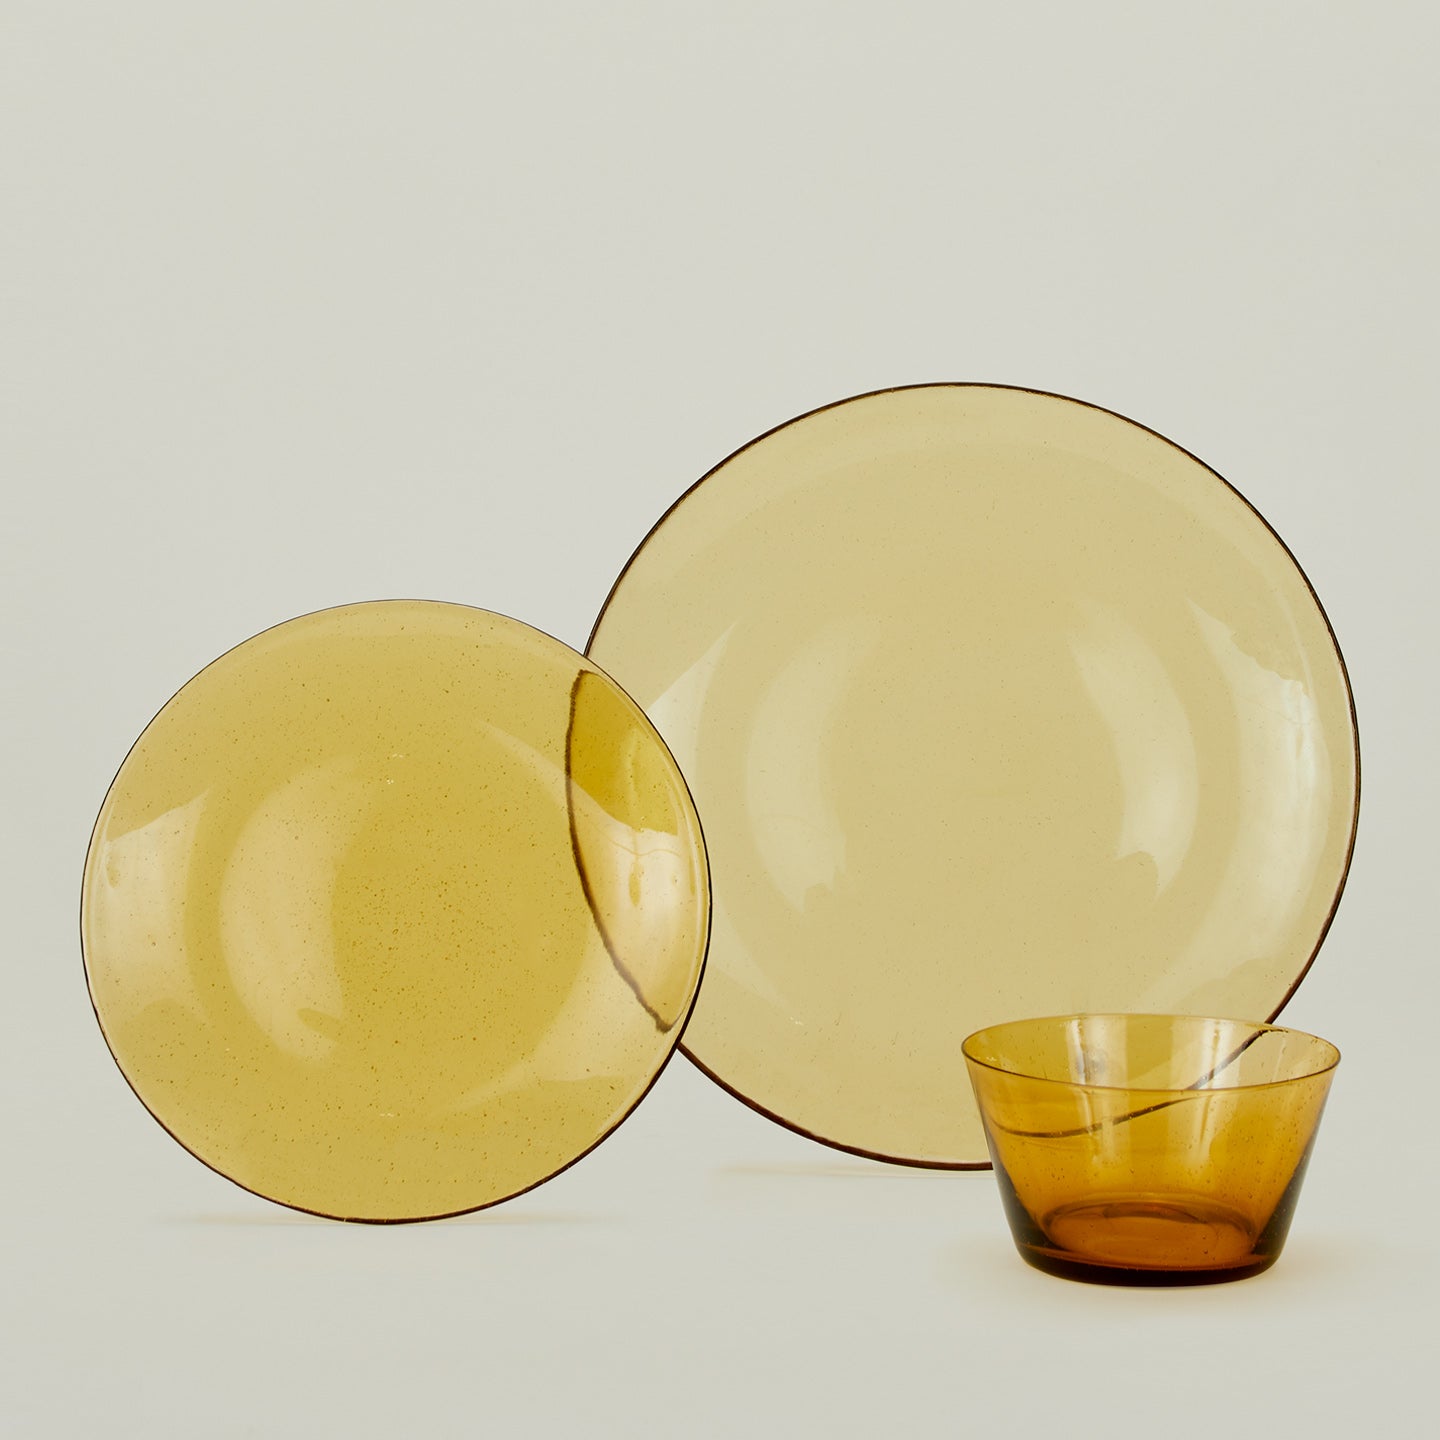 Group of Amber glass salad plate, dinner plate and bowl.